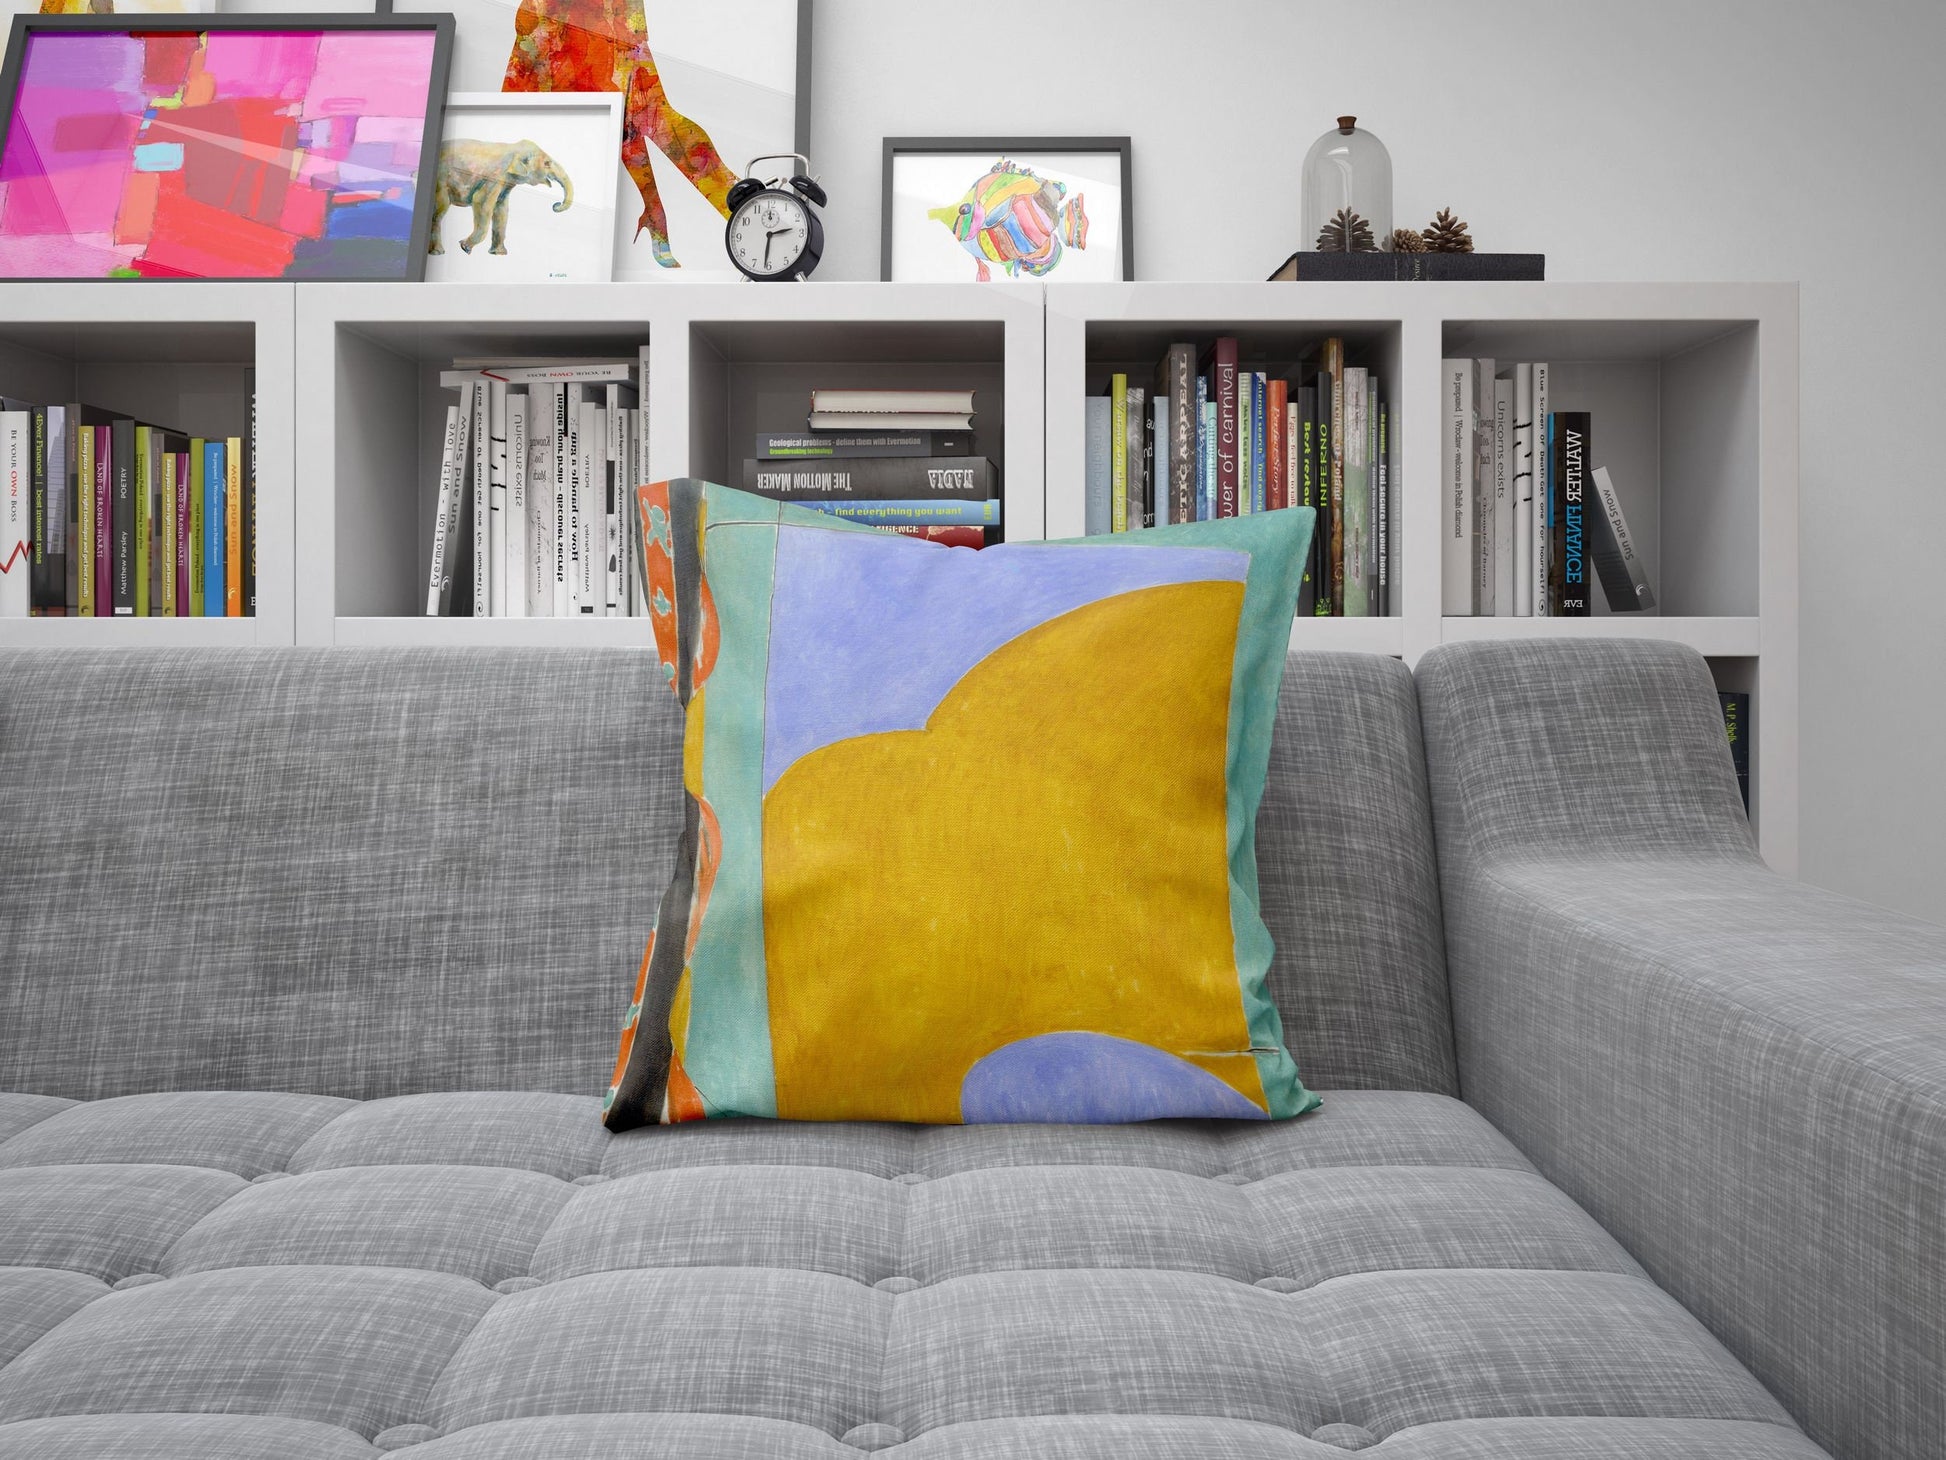 Henri Matisse Famous Painting, Throw Pillow, Abstract Pillow, Soft Pillow Cases, Colorful Pillow Case, Home Decor Pillow, Sofa Pillows